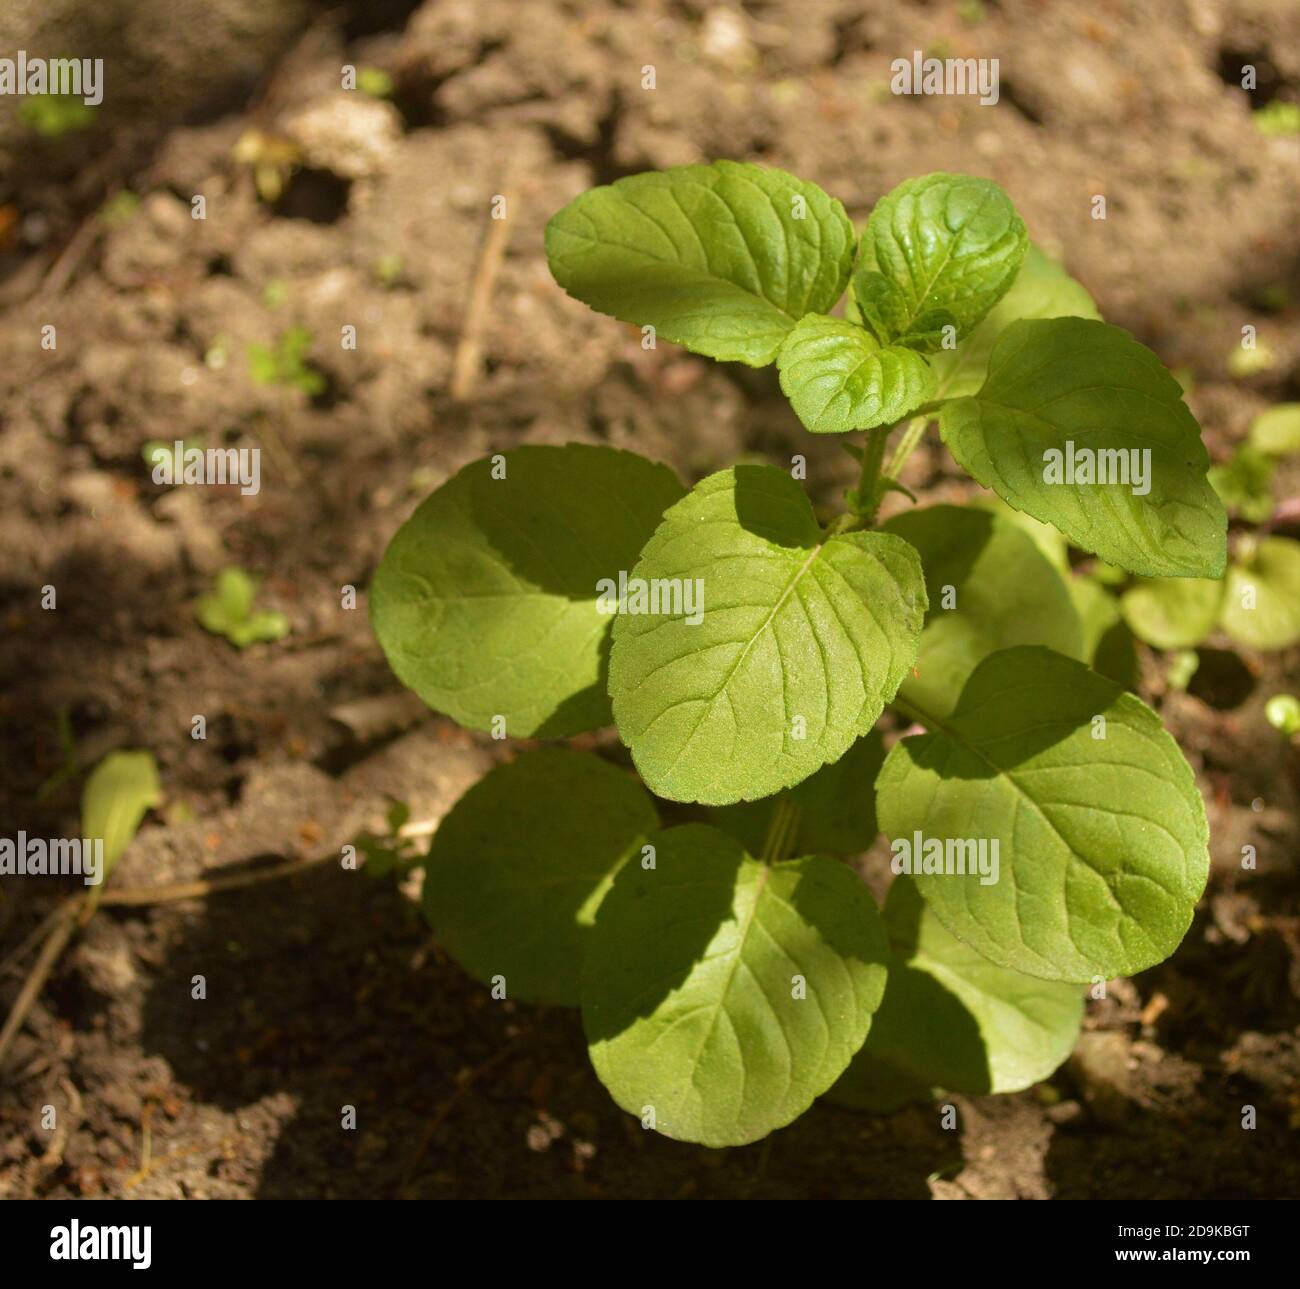 Mint plant in vegetative stage with background soil - Mentha Stock Photo